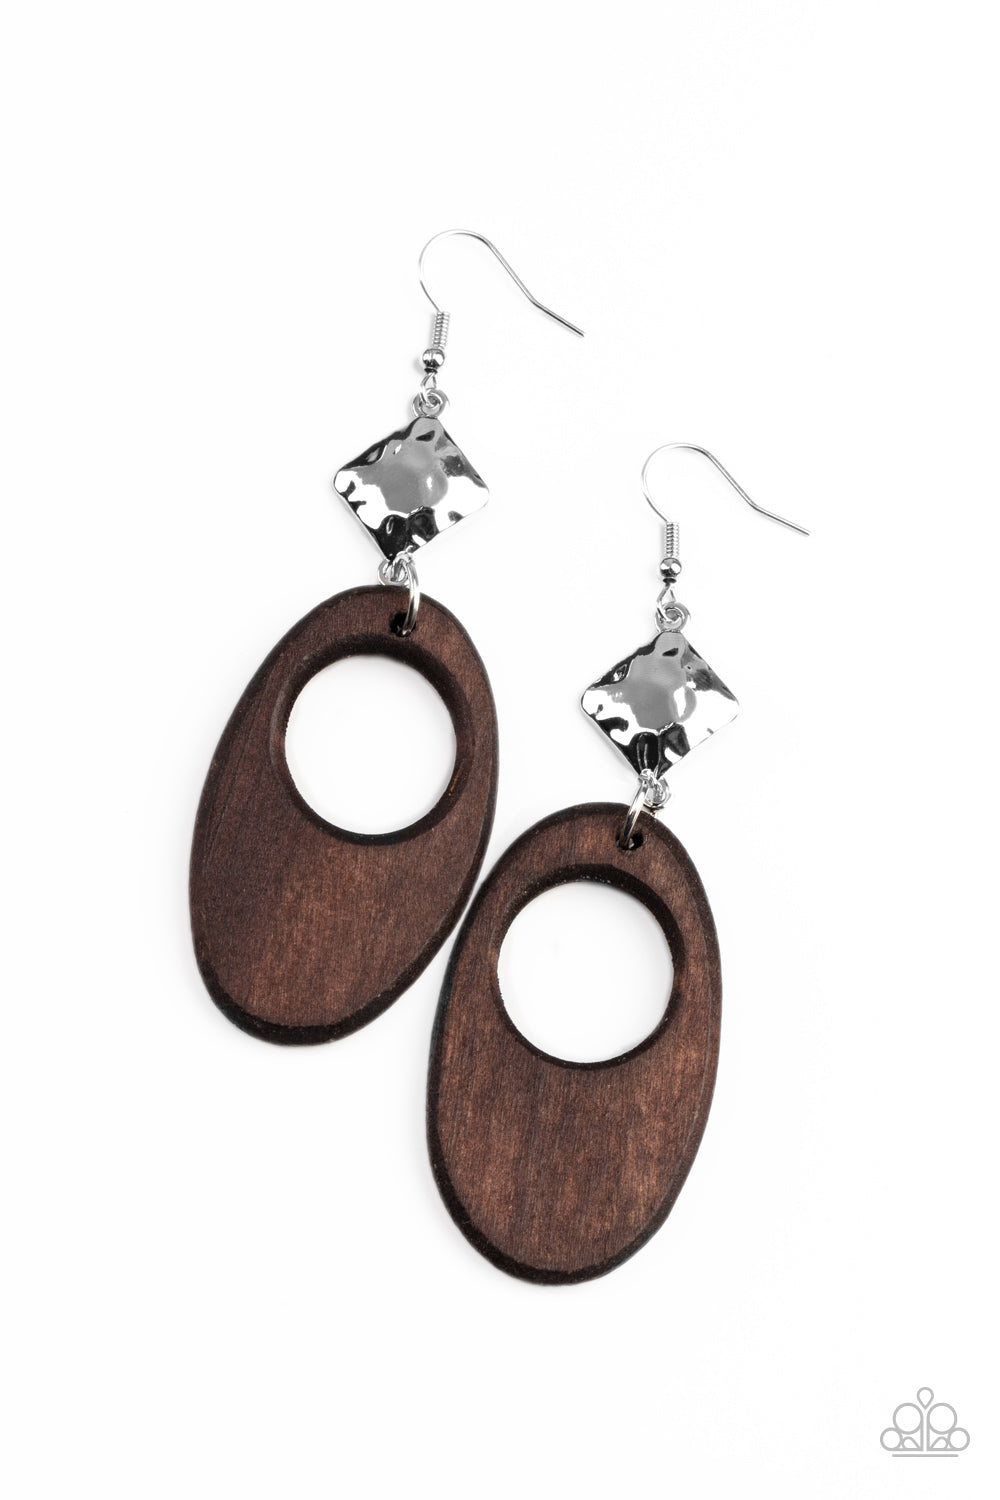 ** 0616 Paparazzi Accessories Retro Reveal - Brown Earrings